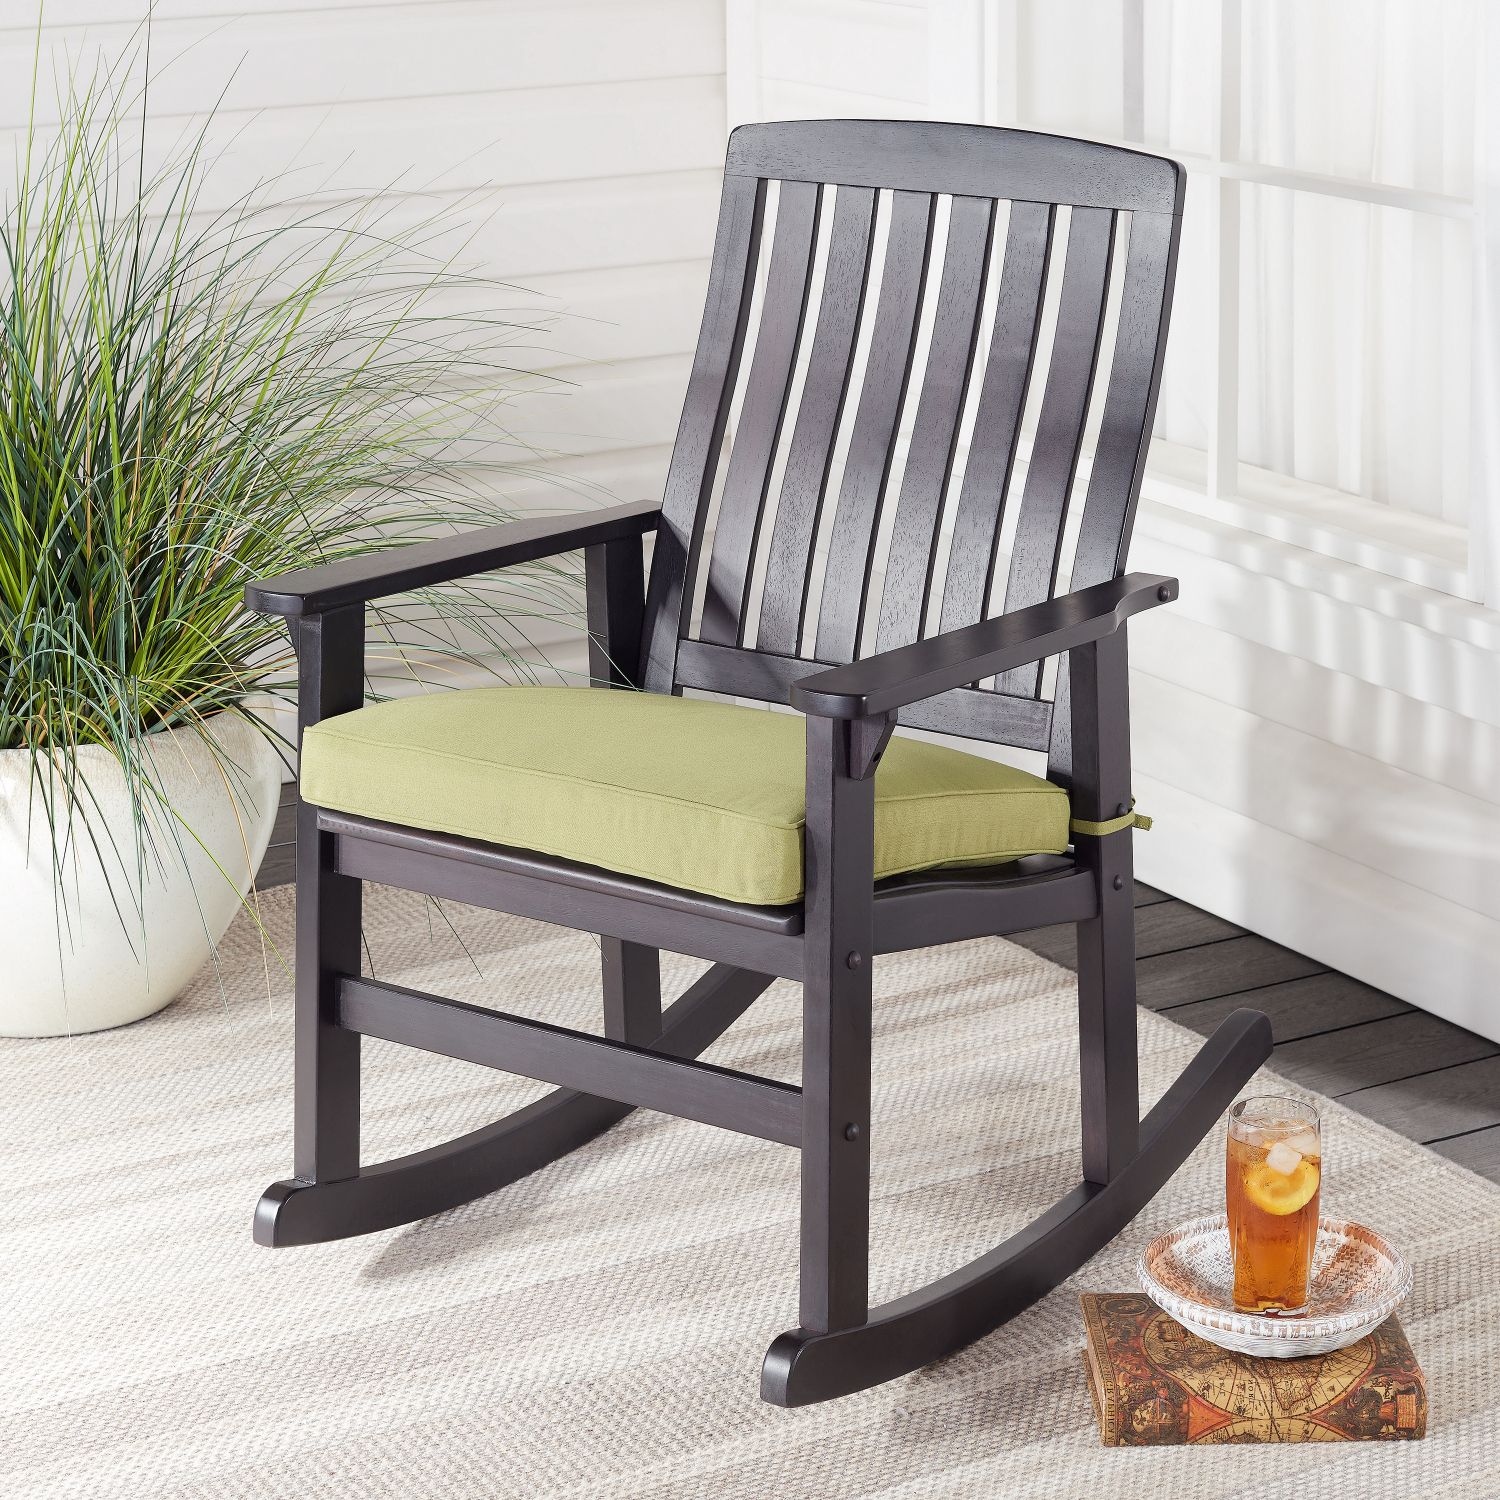 Dark Brown Wood Outdoor Chairs Regarding Most Recent Wood Rocking Chair Durable Furniture Unit Dark Brown Framed Cushioned (View 4 of 15)